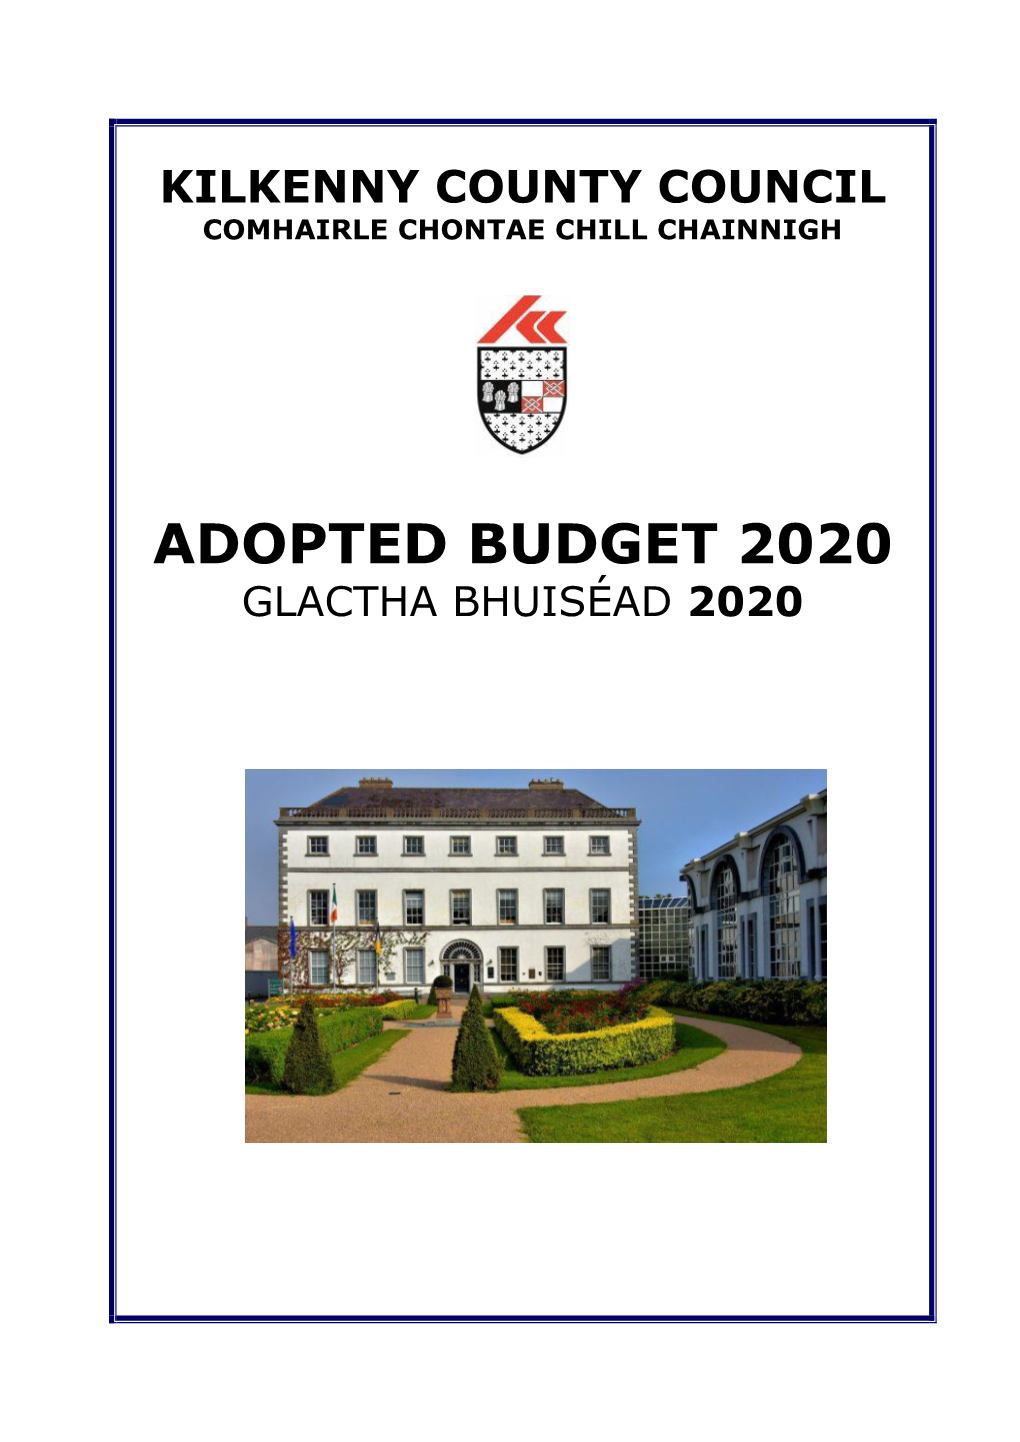 Download Adopted Budget 2020.Pdf